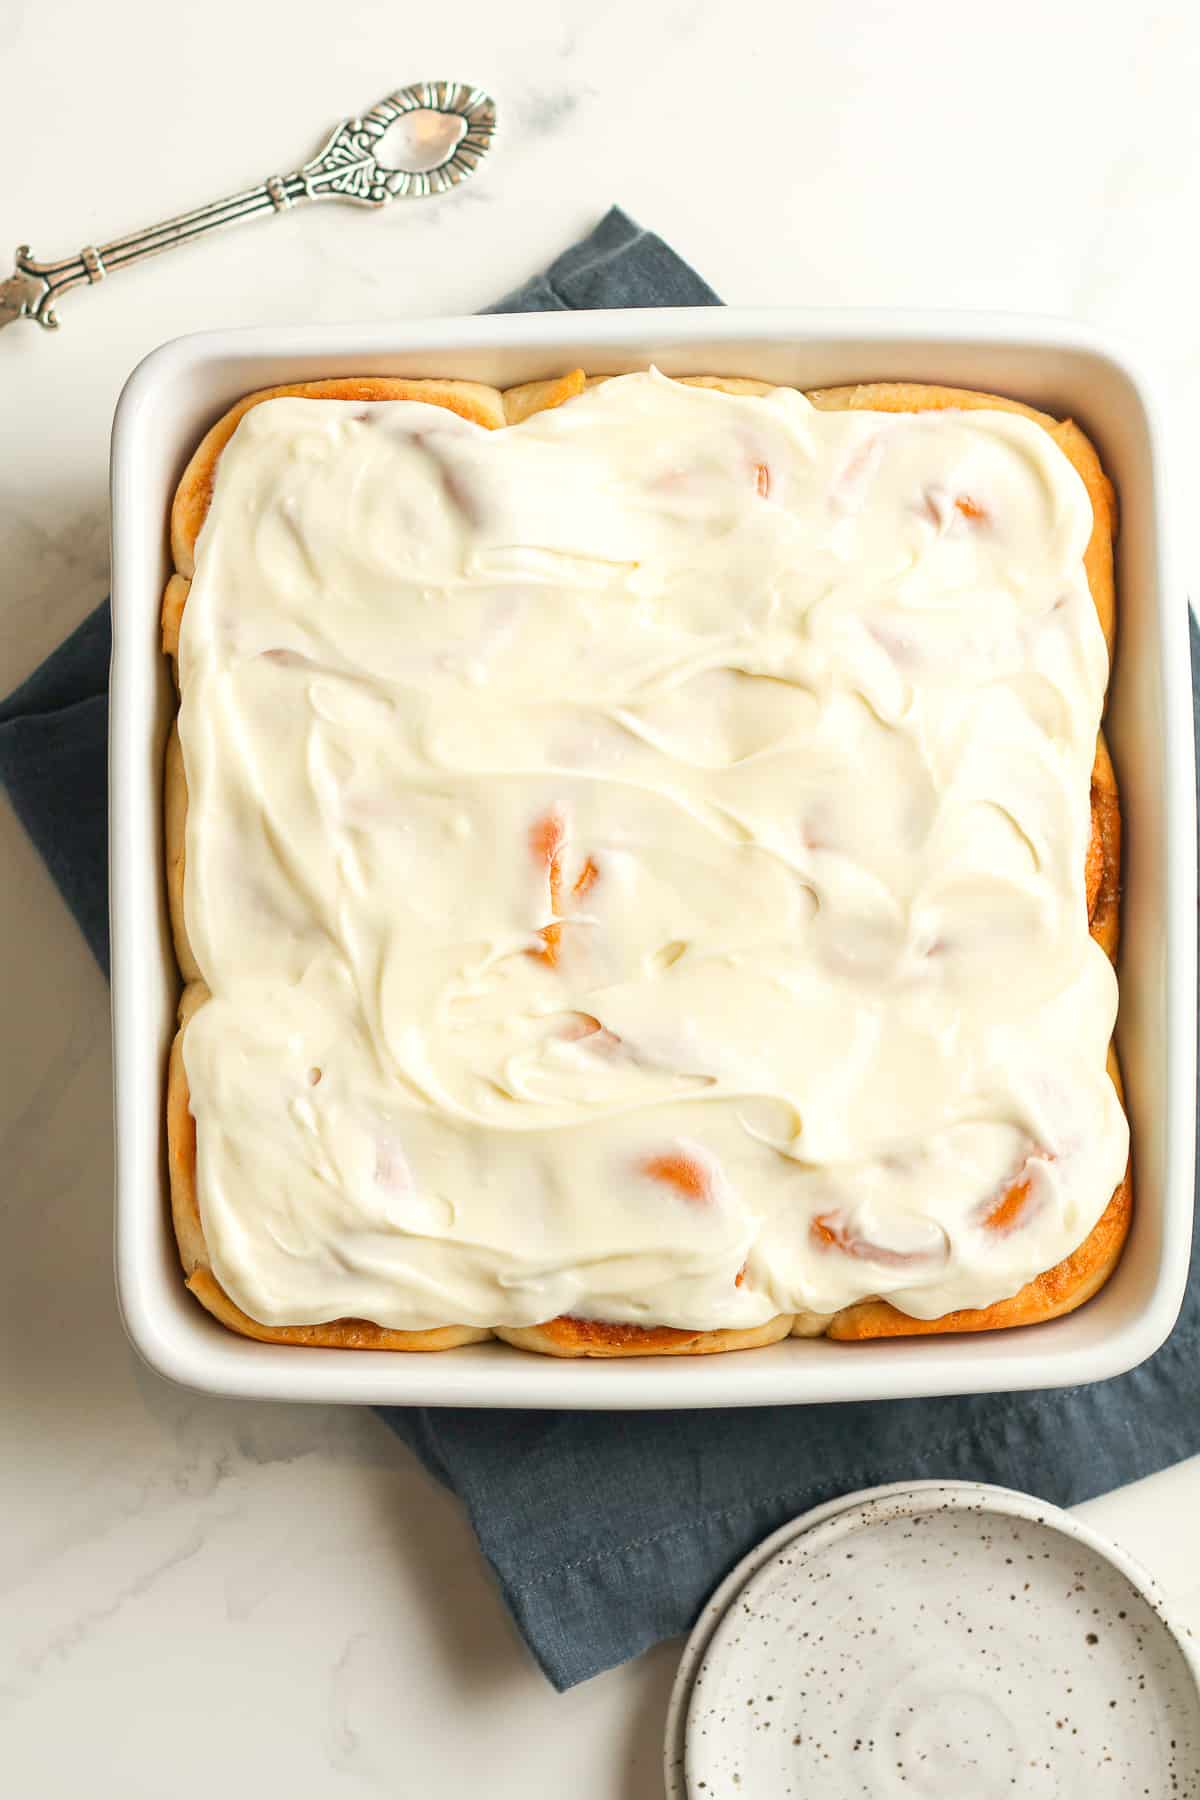 A square dish of baked homemade cinnamon rolls with cream cheese frosting on top.